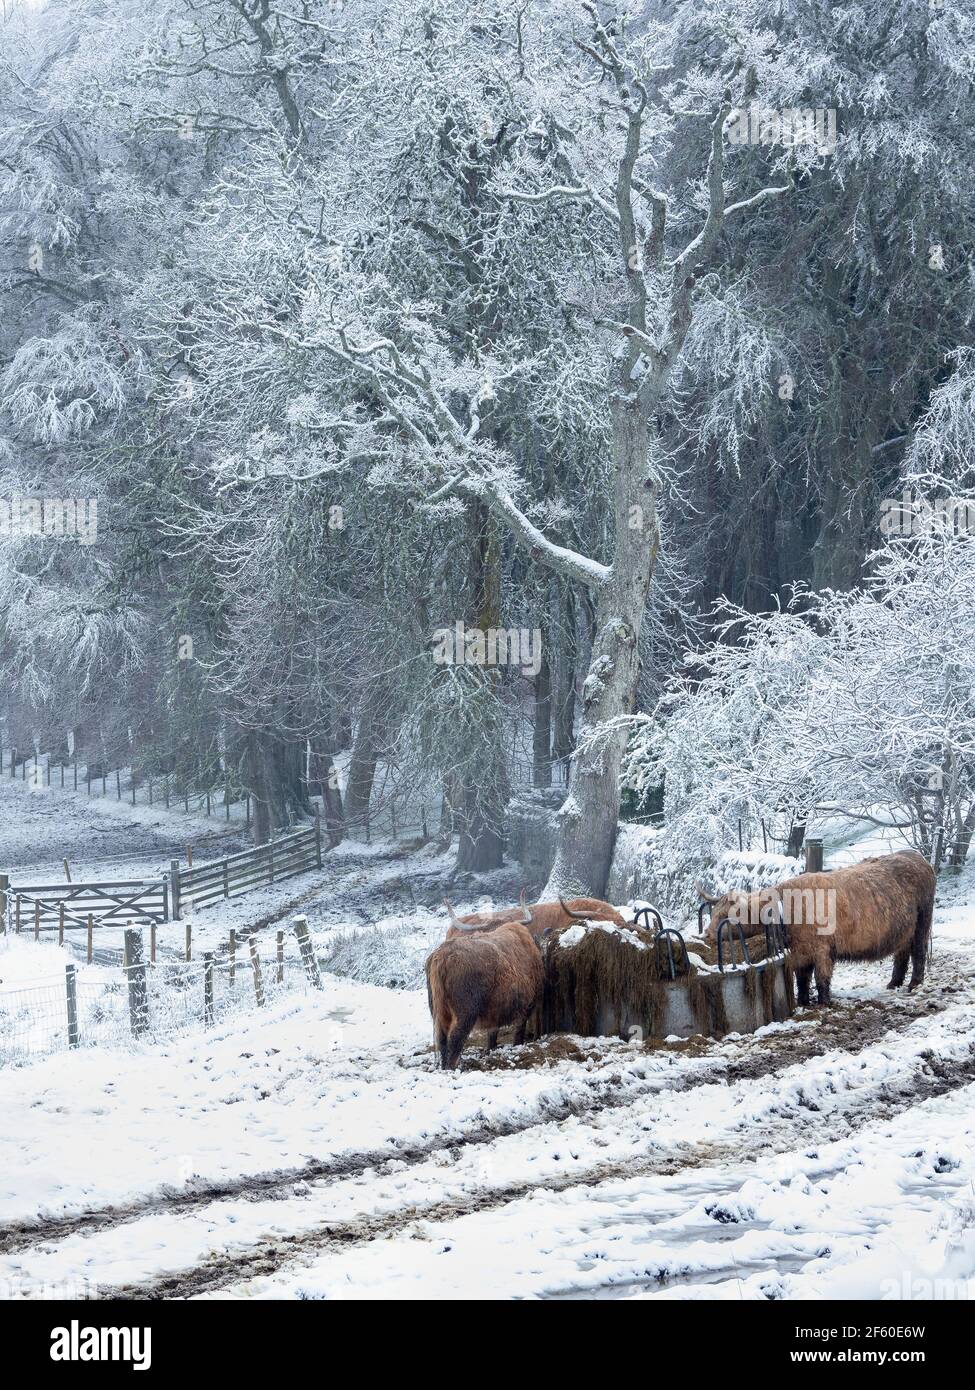 Highland cows at a feeding station with snow covered trees and ground. Stock Photo